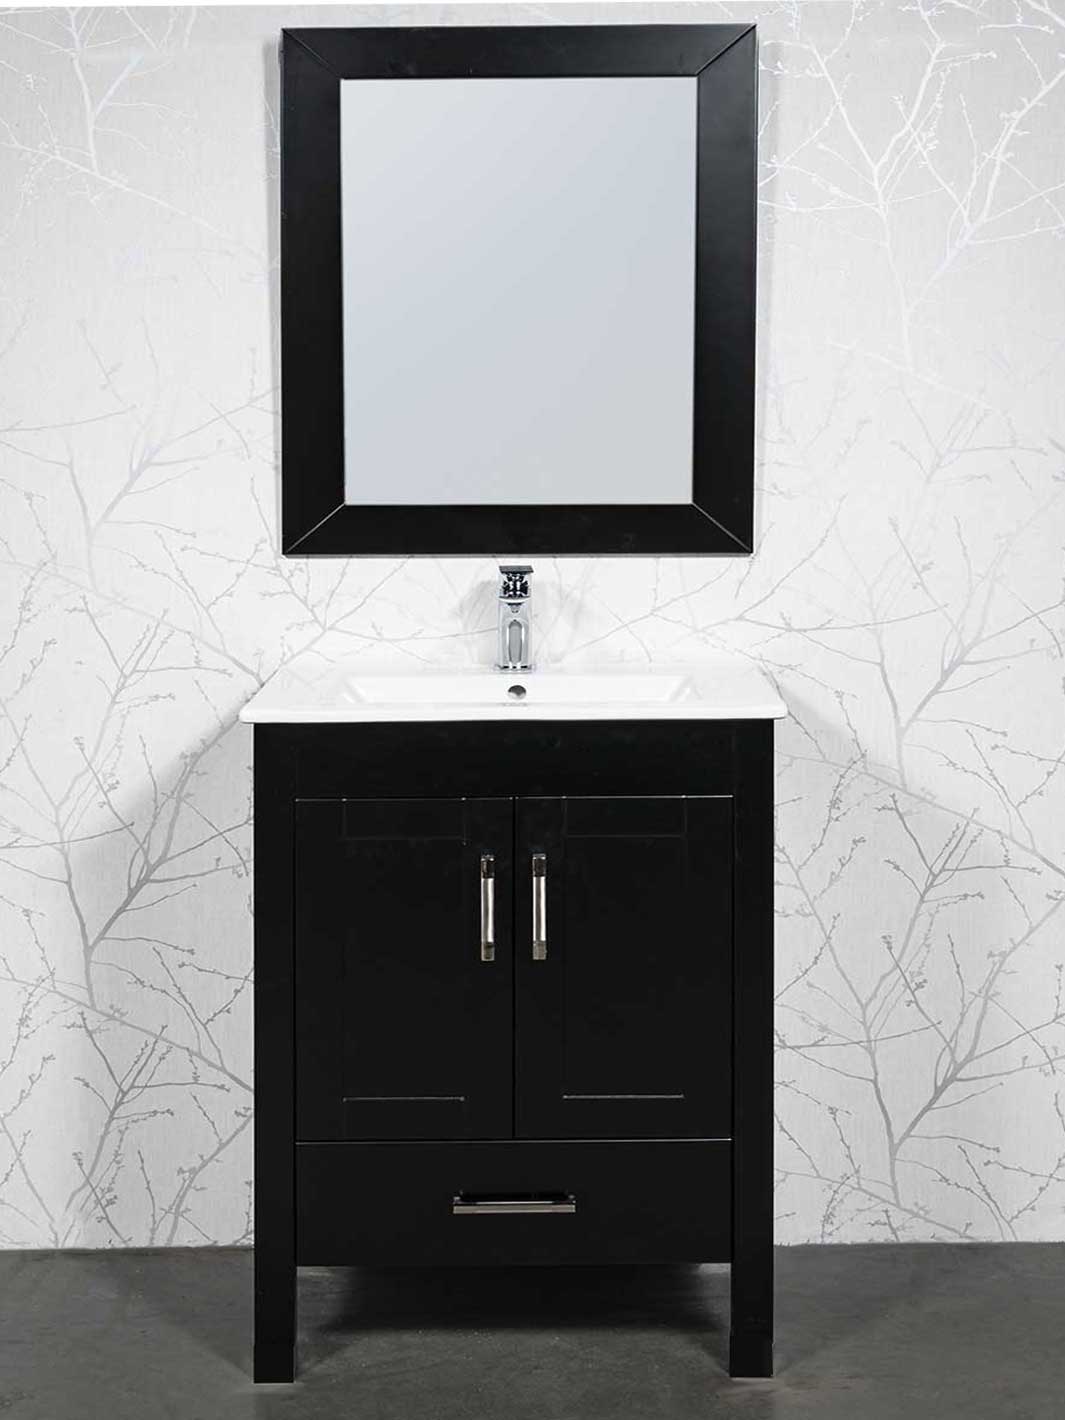 30 inch black vanity with white carmic sink, chrome faucet and black framed mirror